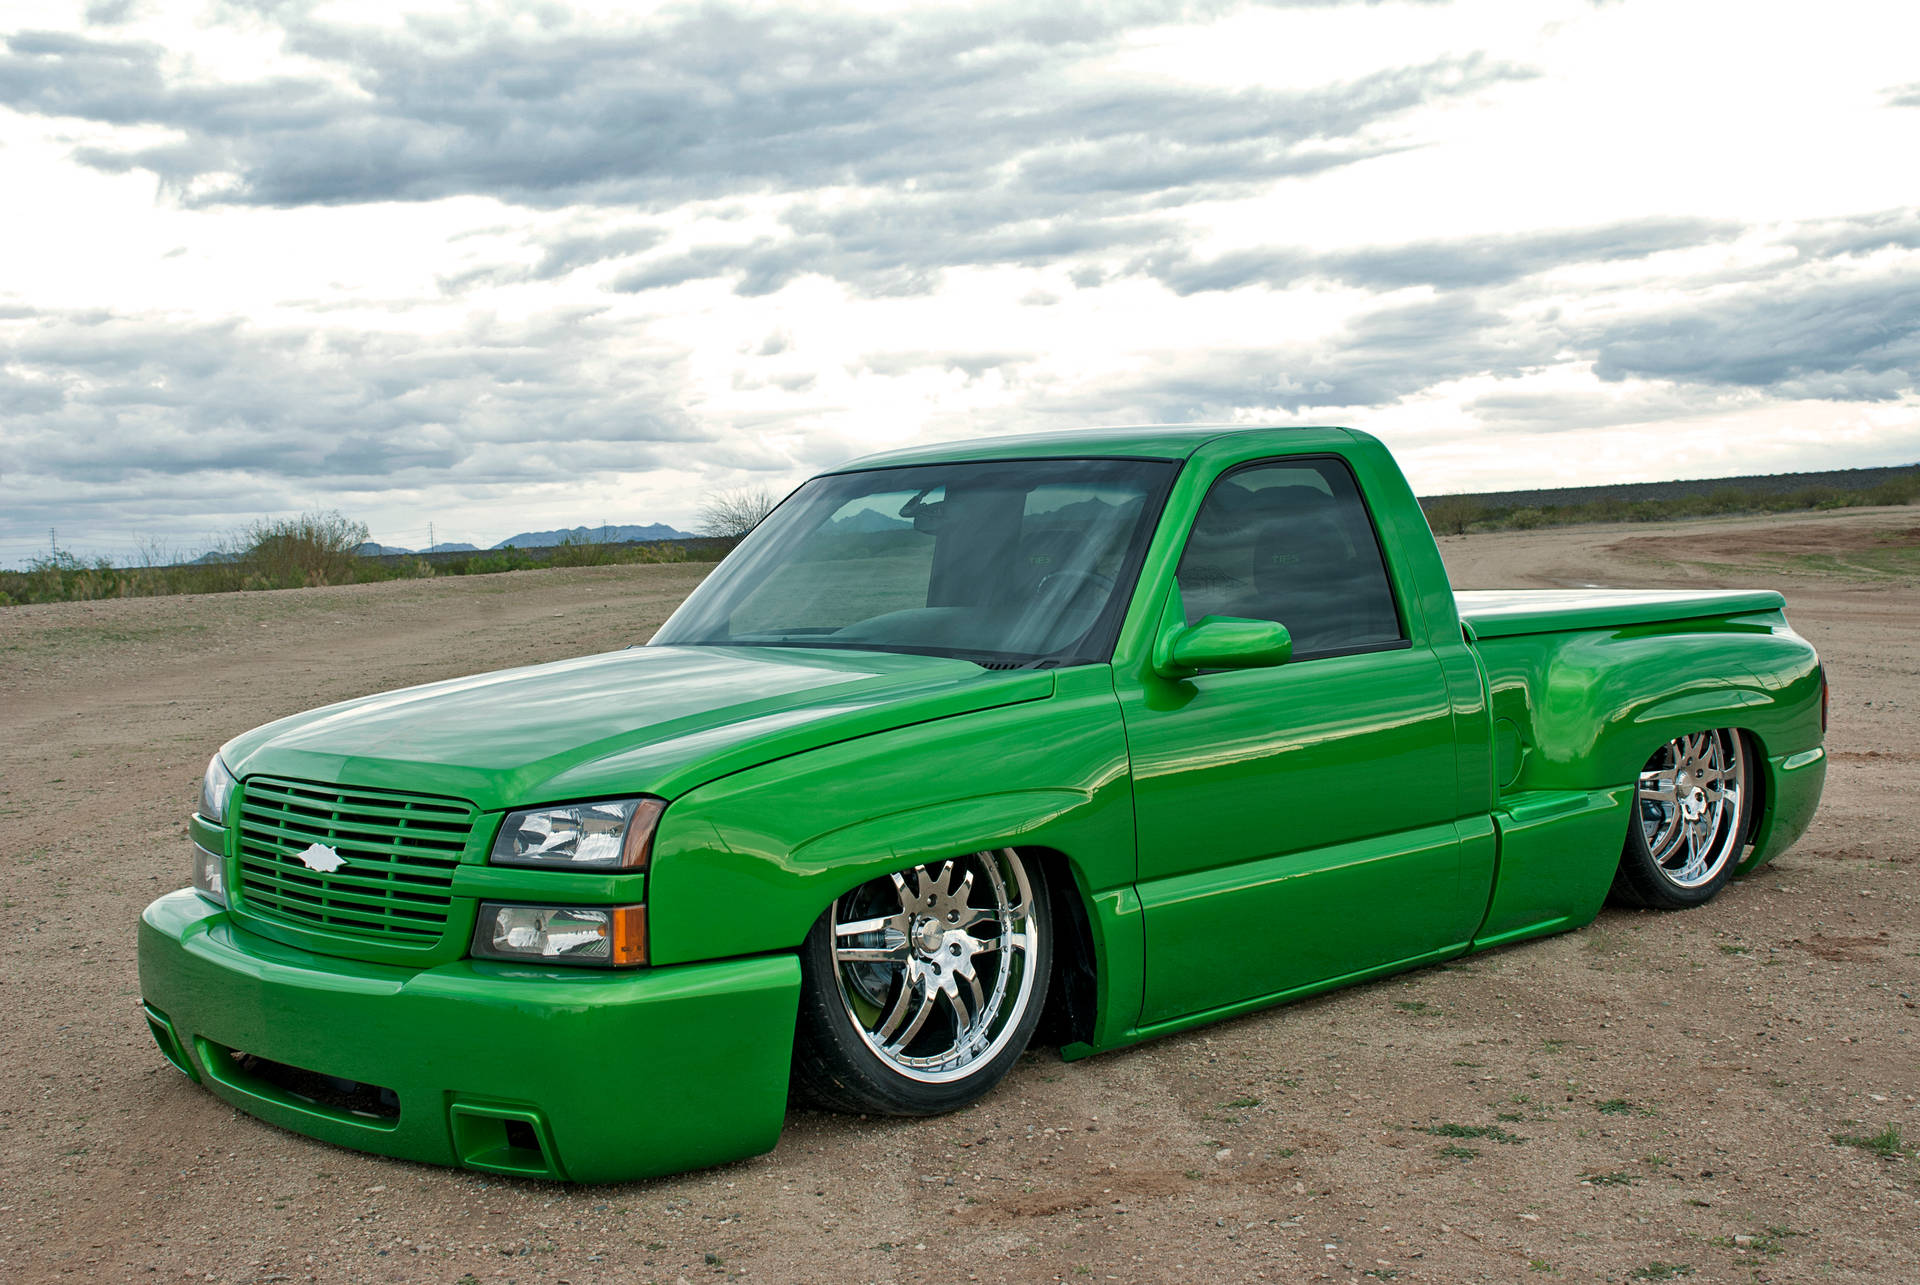 Parked Green Dropped Truck Background